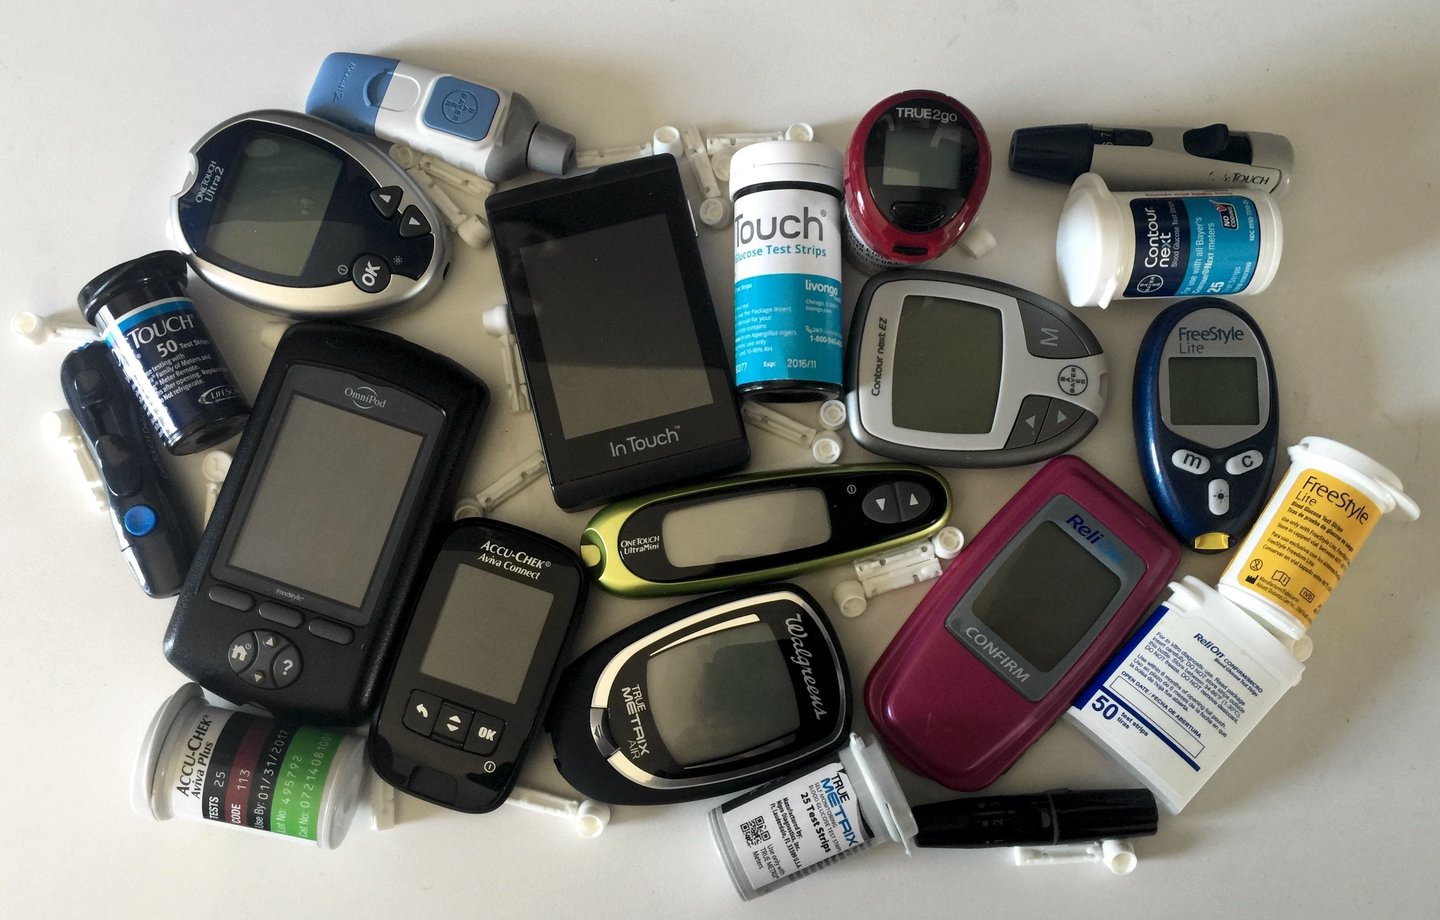 How To Dispose Of Old Glucose Meters